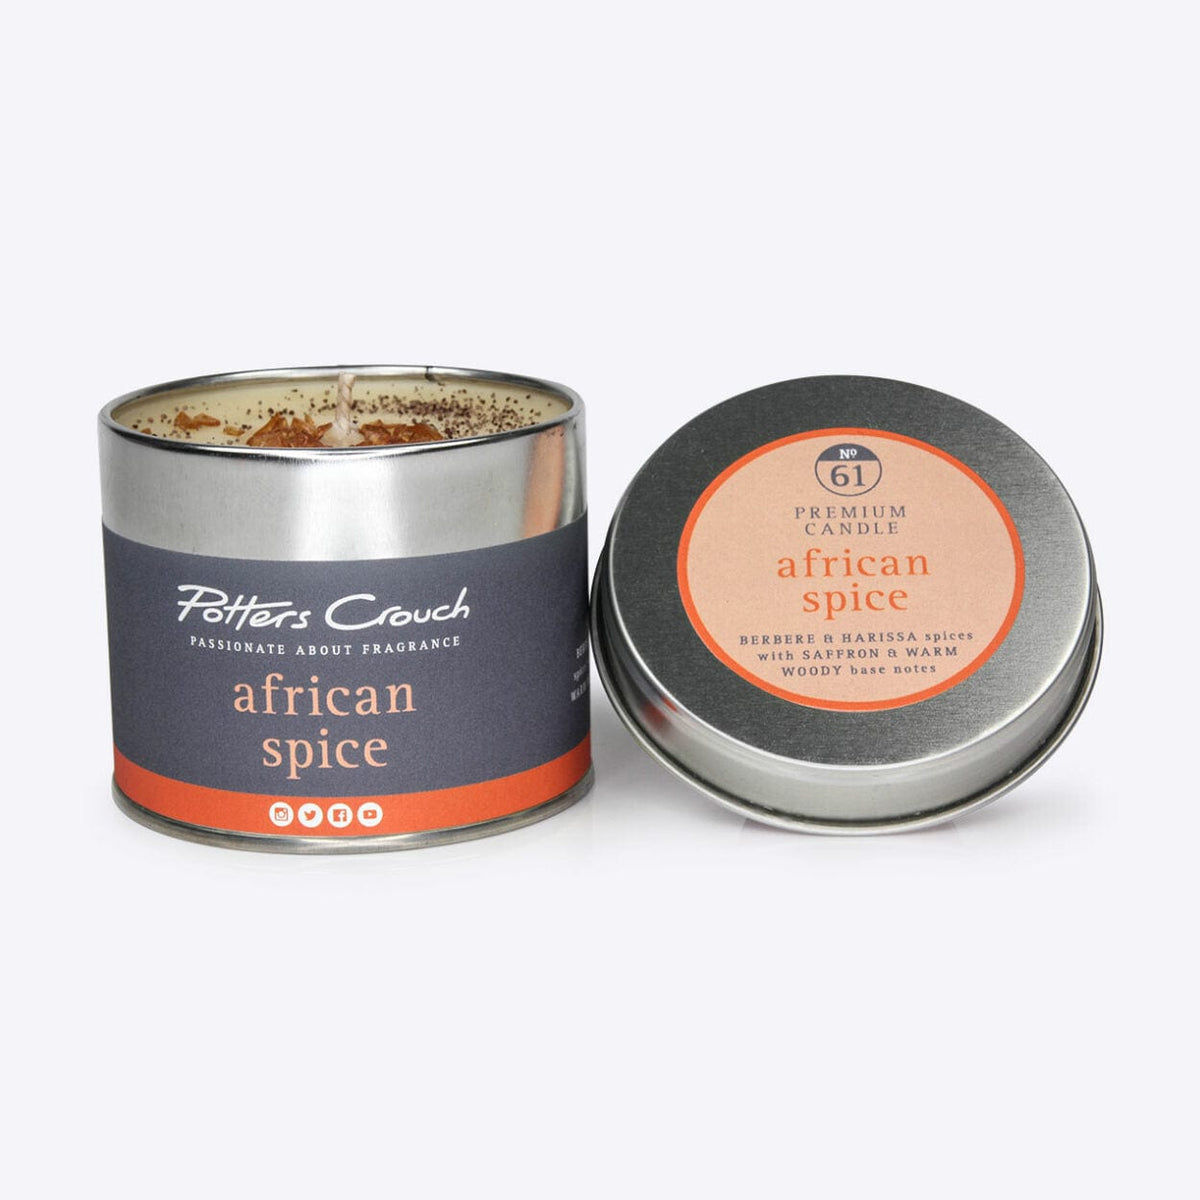 Potters Crouch African Spice Scented Candle in a Tin